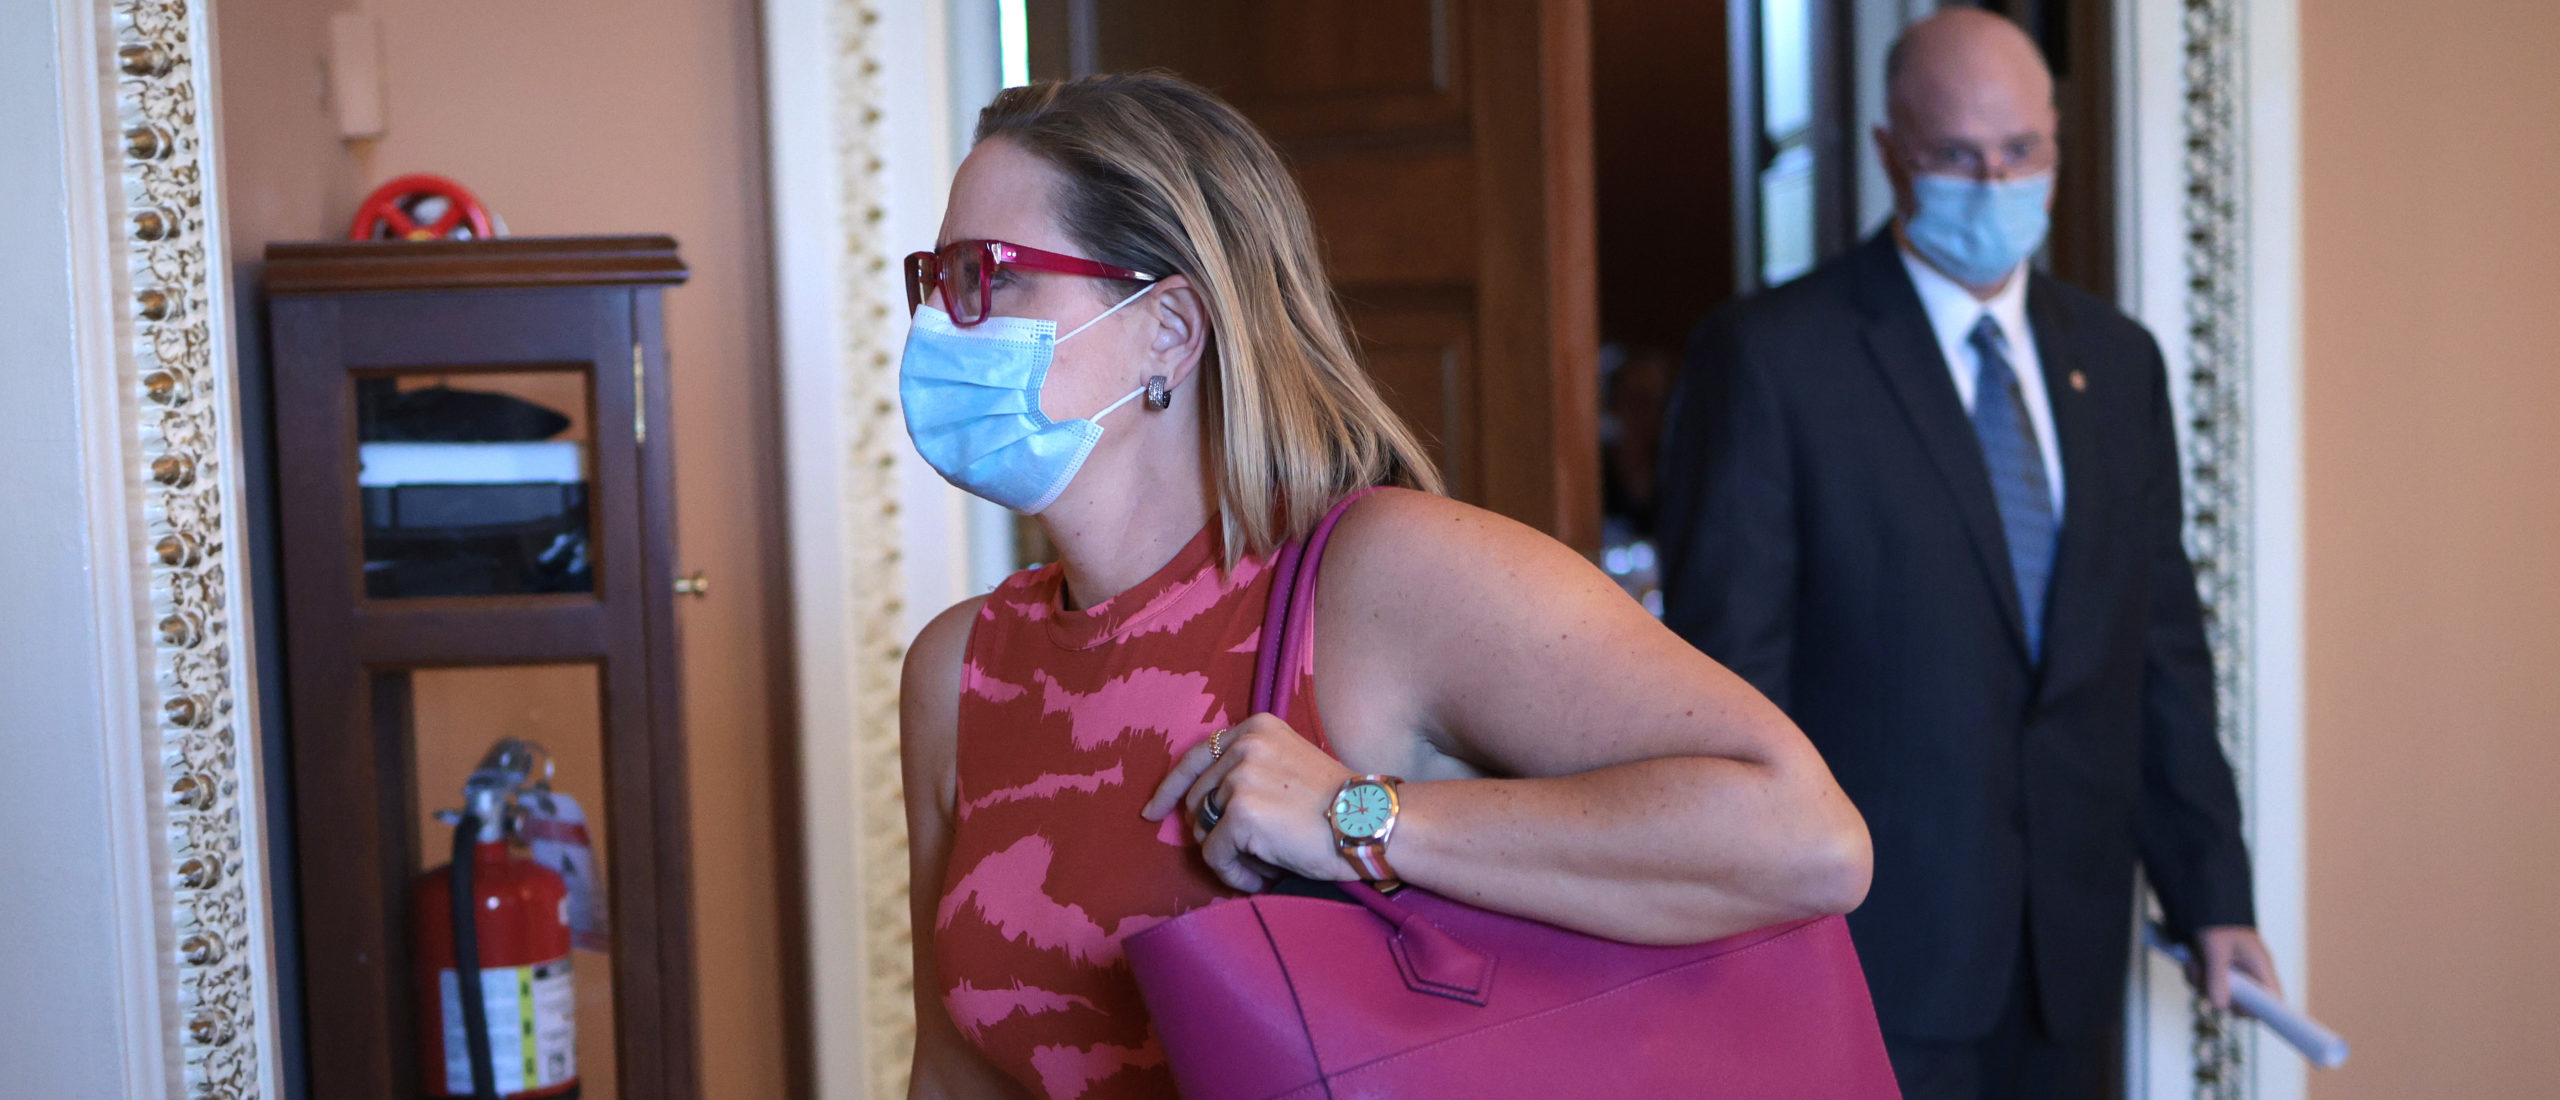 Sen. Kyrsten Sinema (D-AZ) leaves a Democratic luncheon before heading to the U.S. Senate chamber at the U.S. Capitol on September 30, 2021 in Washington, DC. The Senate is expected to pass a short term spending bill to avoid a government shutdown. (Photo by Win McNamee/Getty Images)